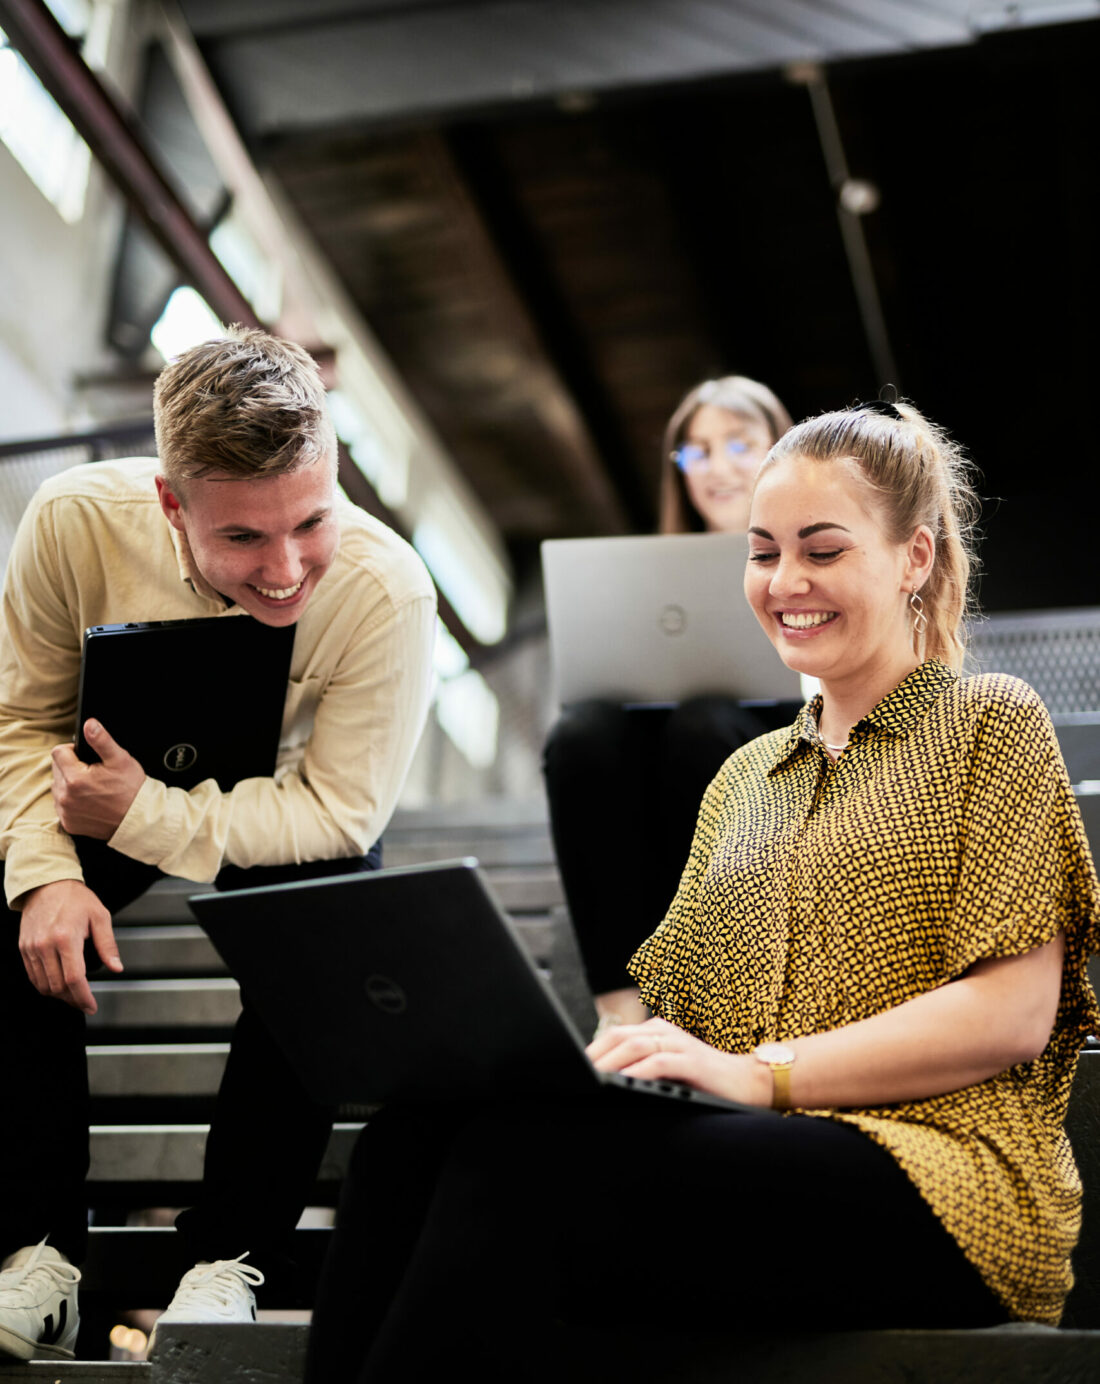 Photo of a young woman and a young man sitting on steps and working on a presentation on a laptop.